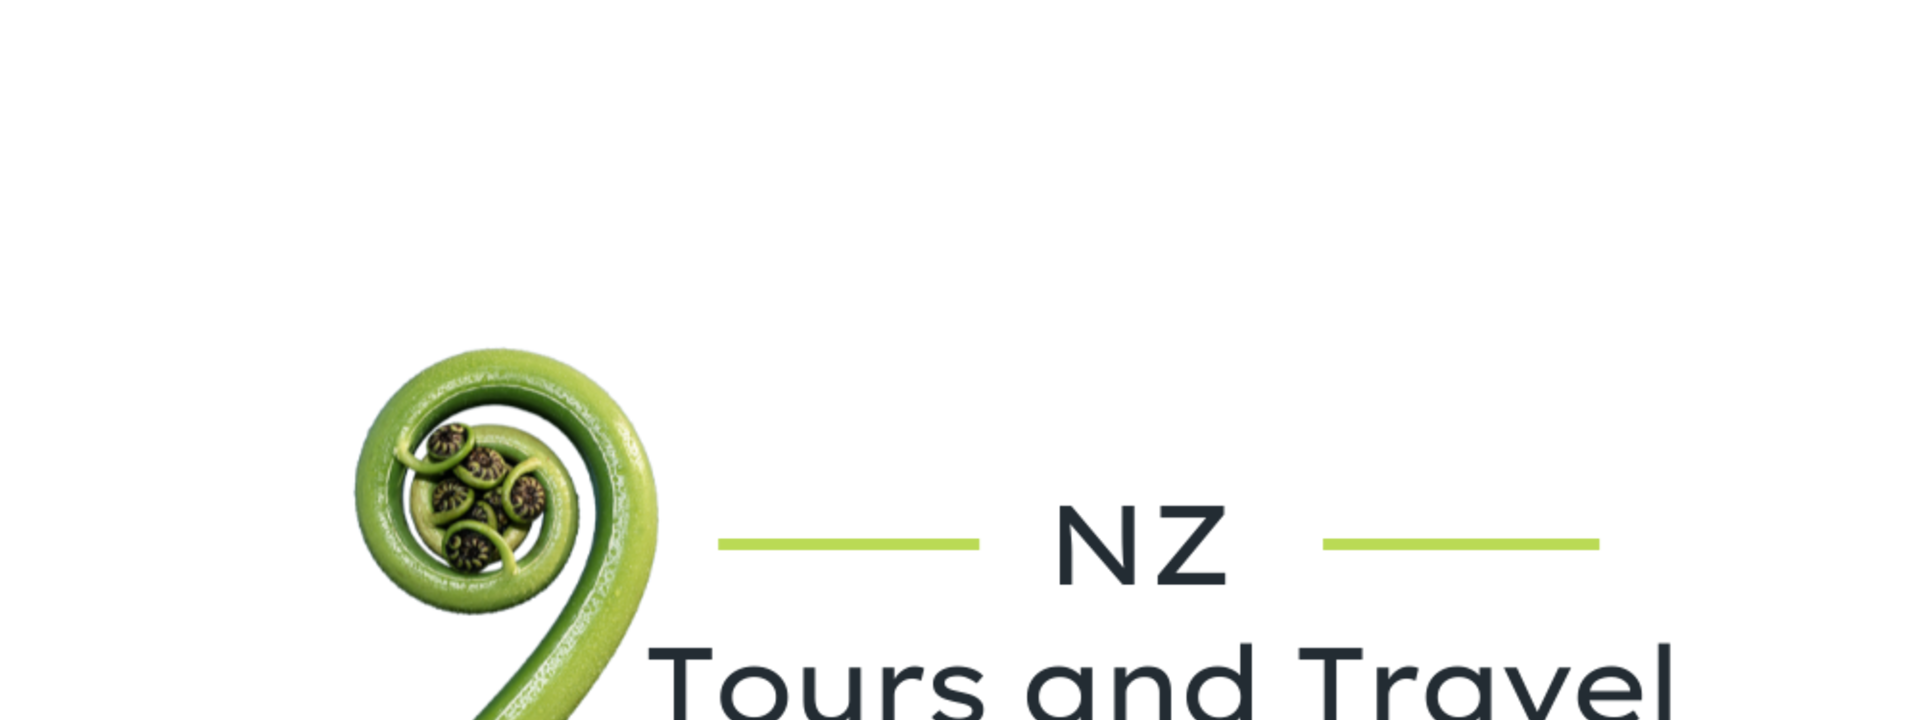 NZ Tours and Travel logo.png